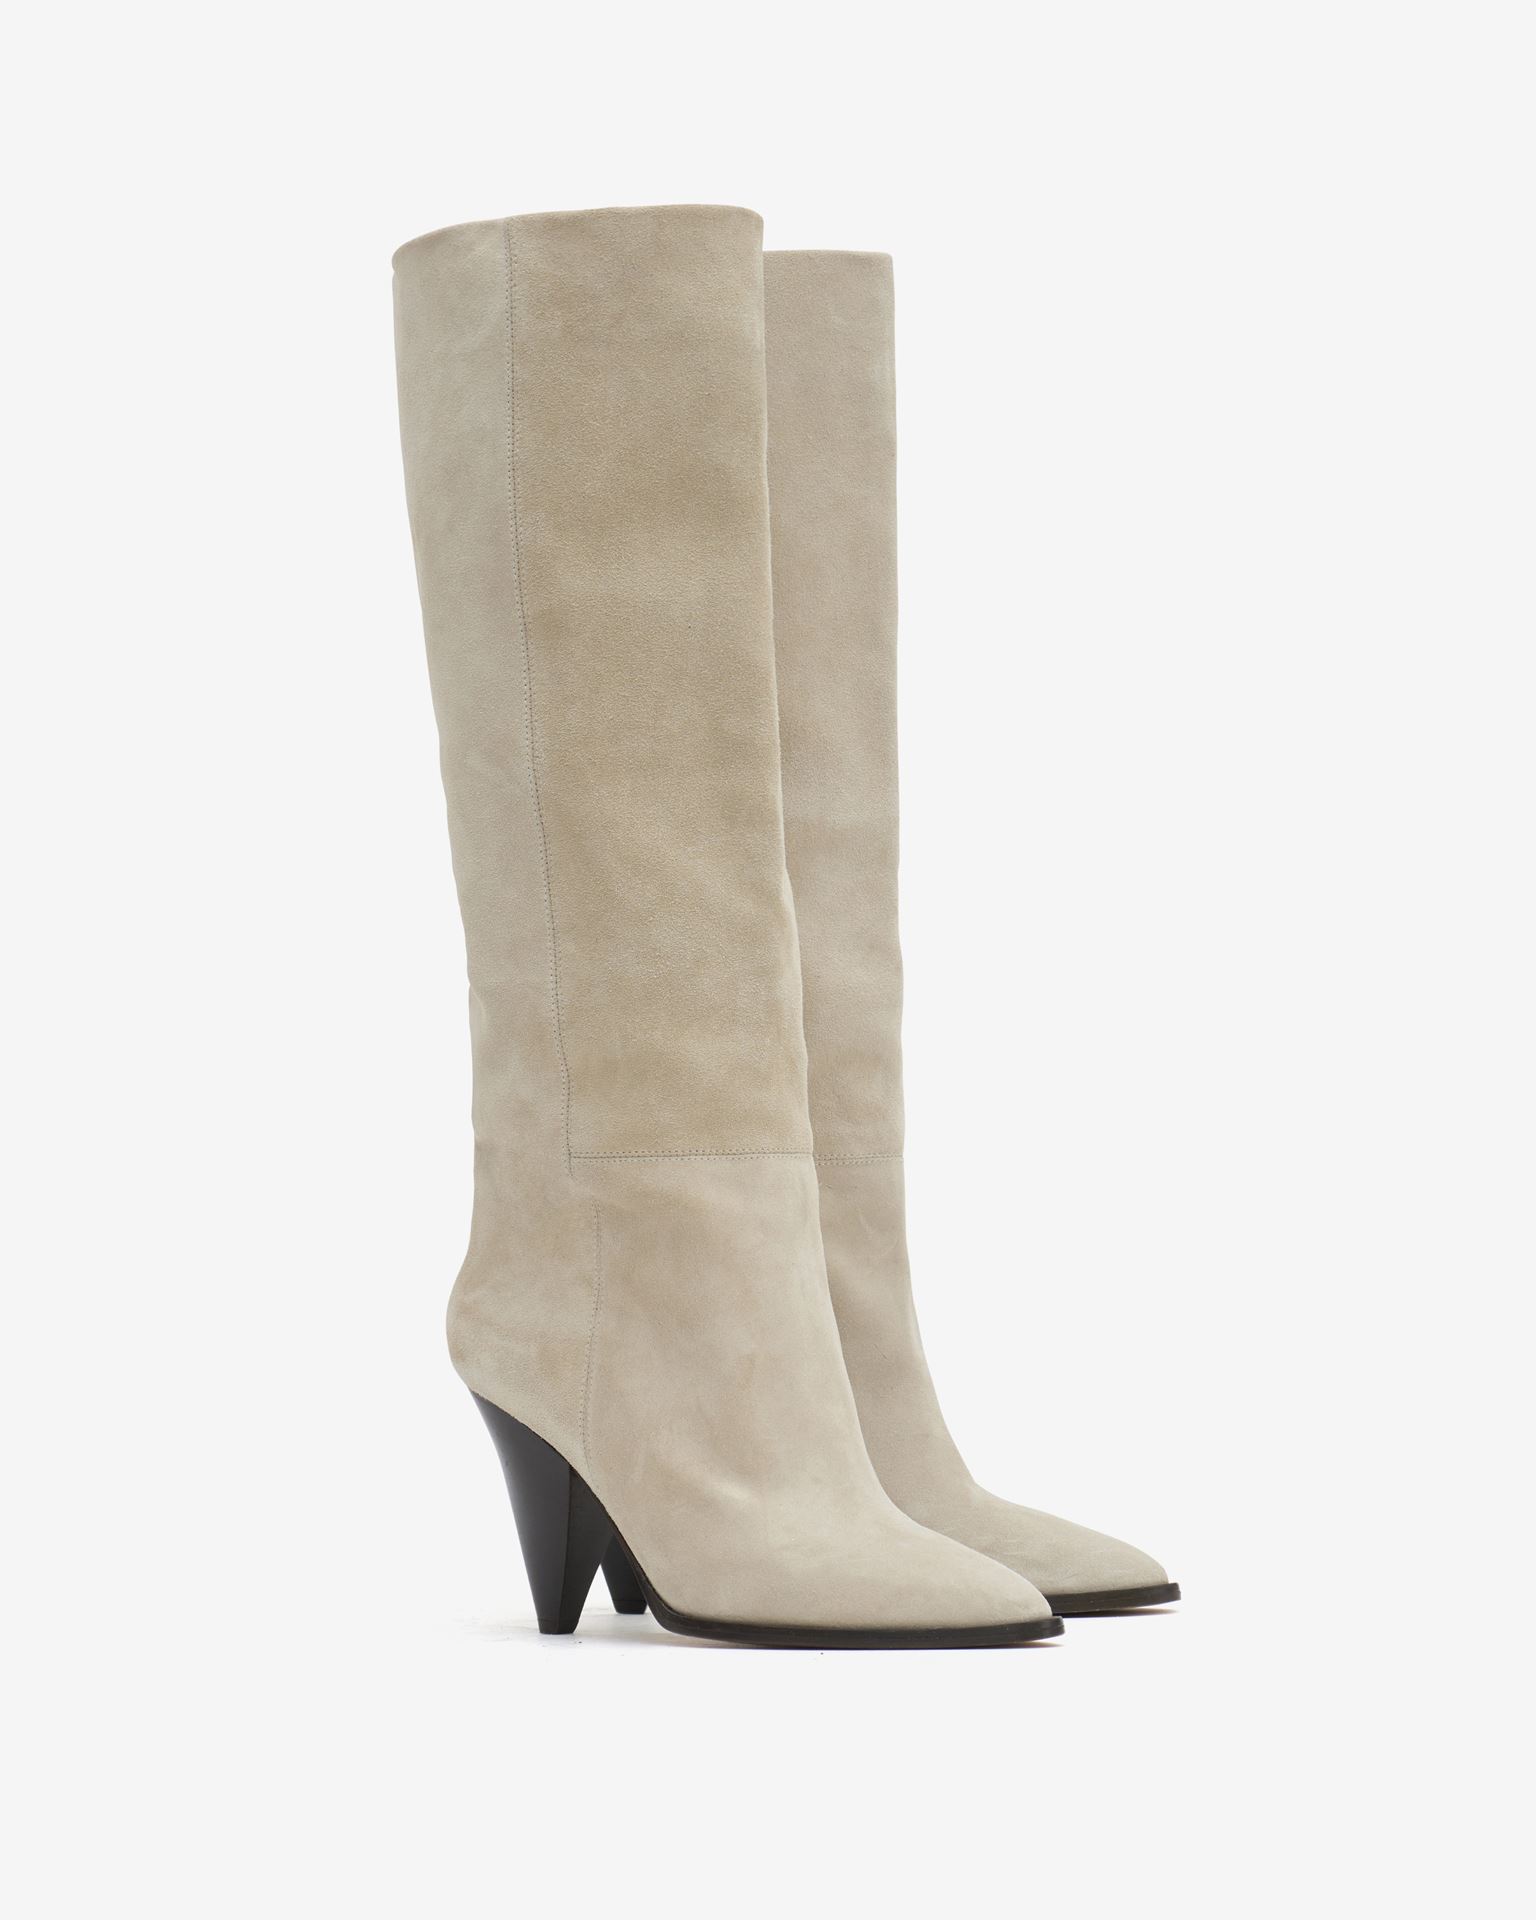 Isabel Marant, Ririo Suede Leather Boots - Women - White